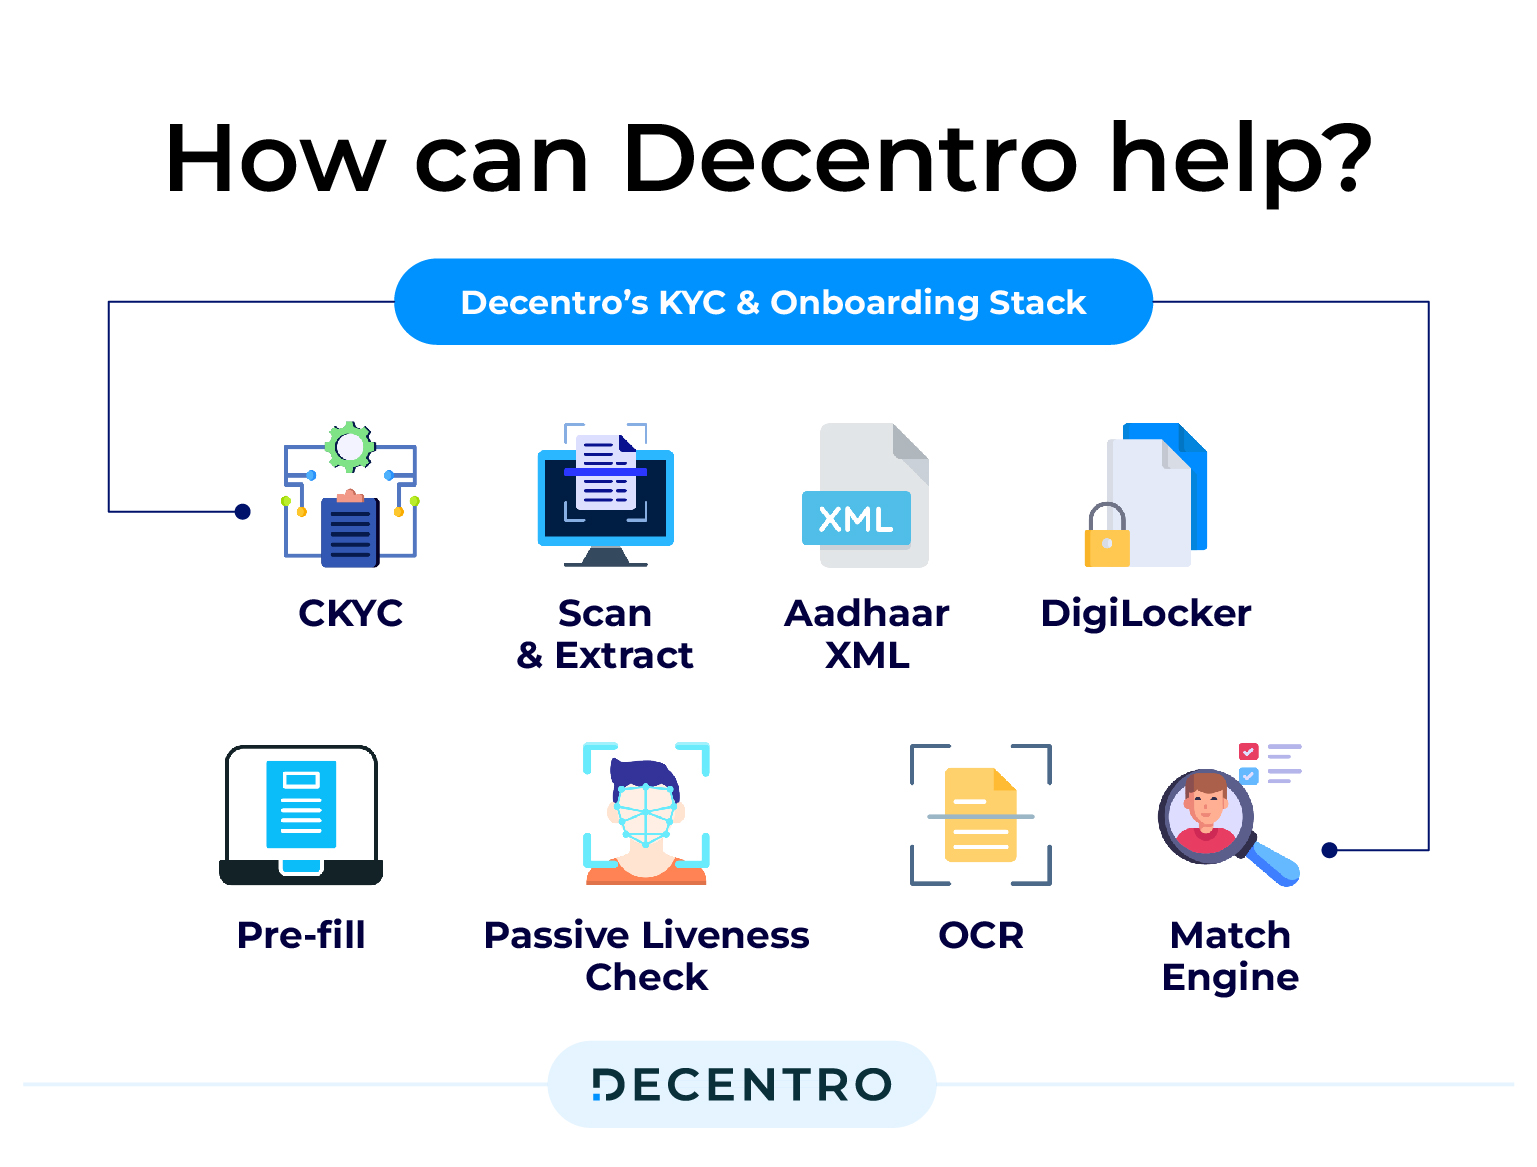 How can Decentro help prevent KYC frauds